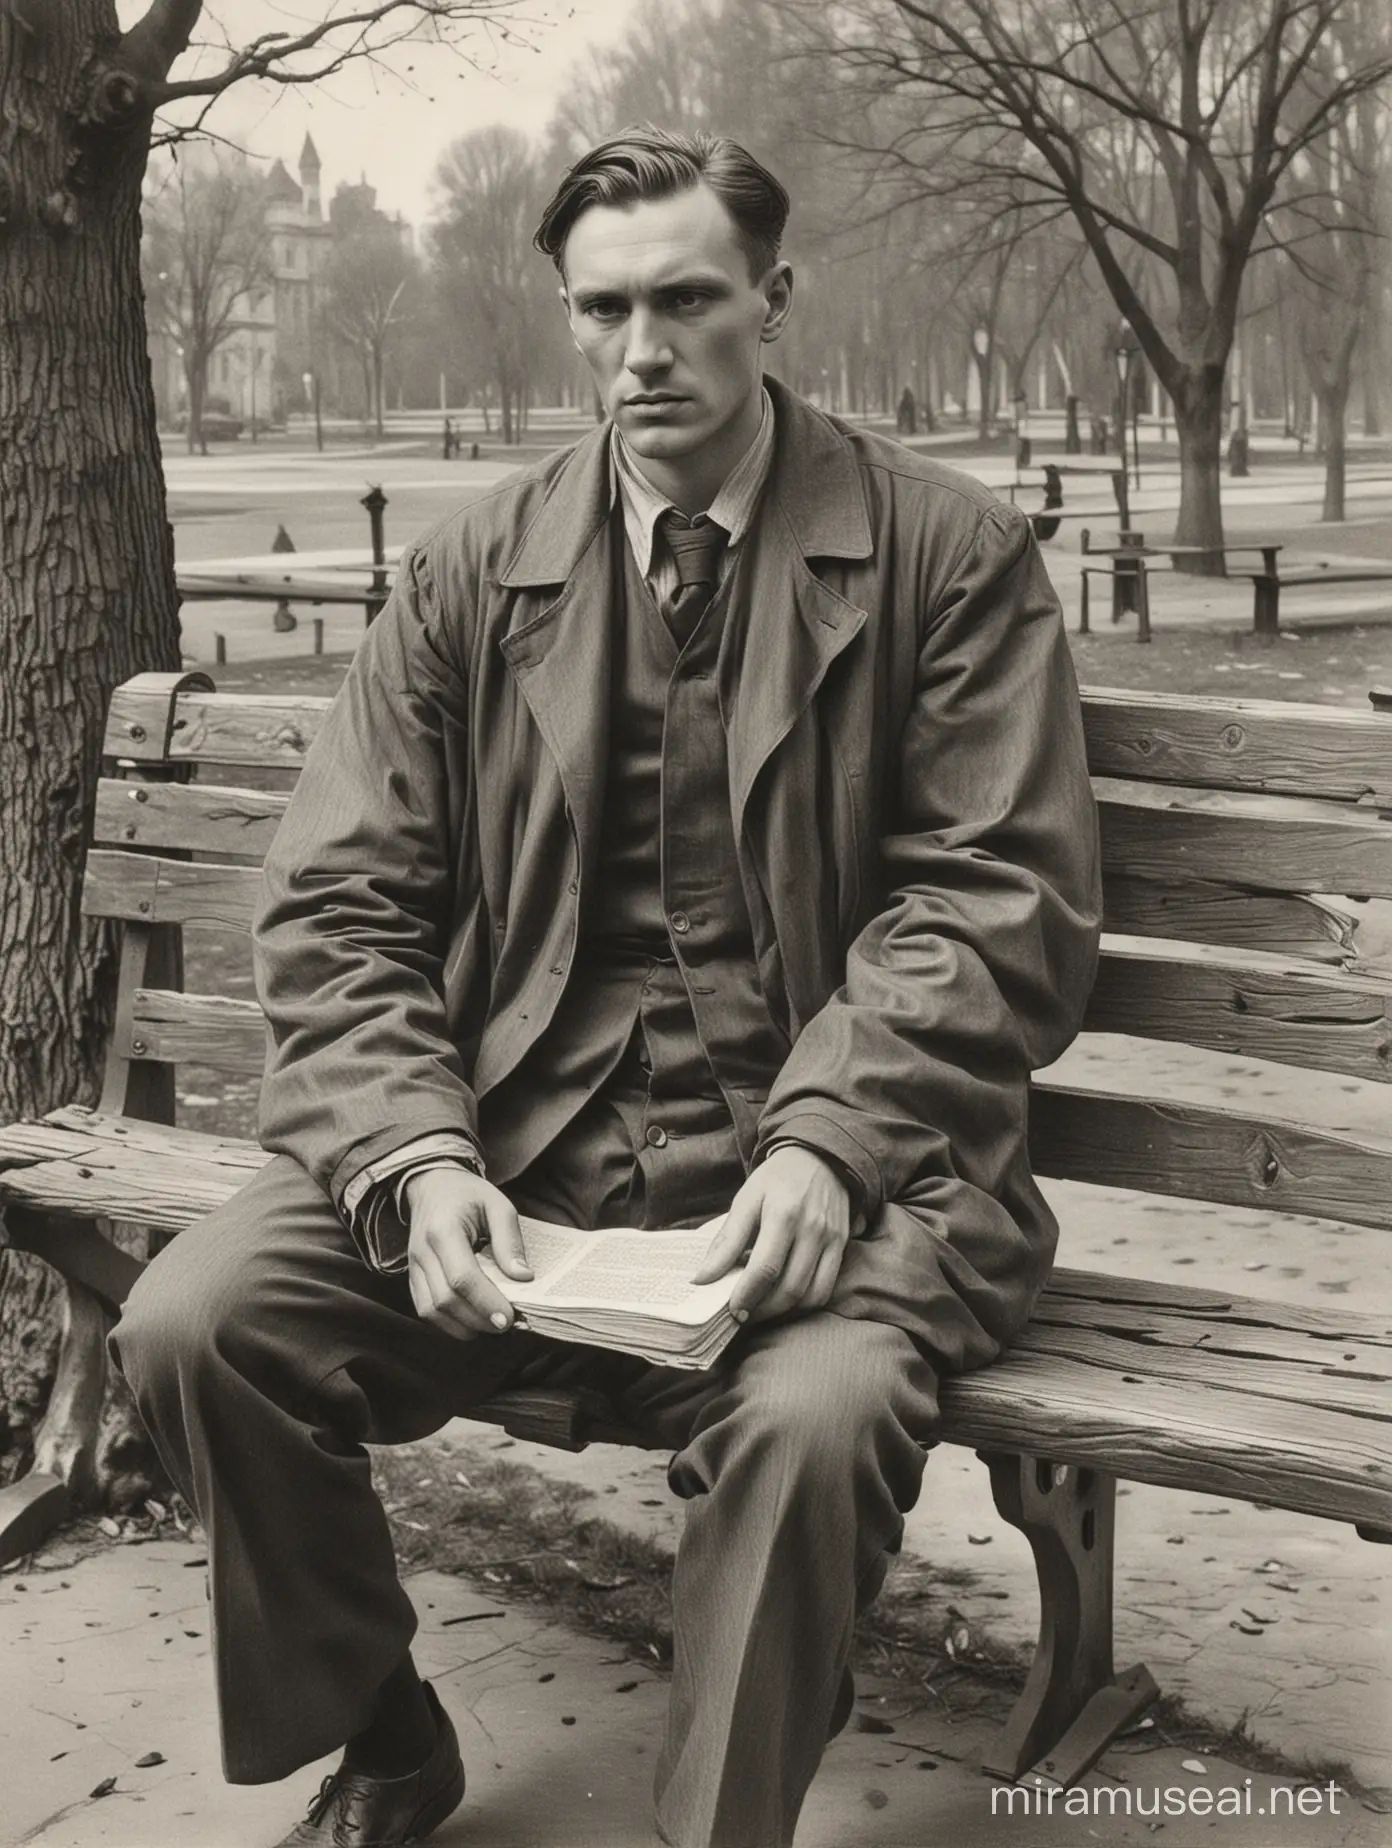 Russian Poet Vladimir Mayakovsky Sketching with a Pencil on Bench